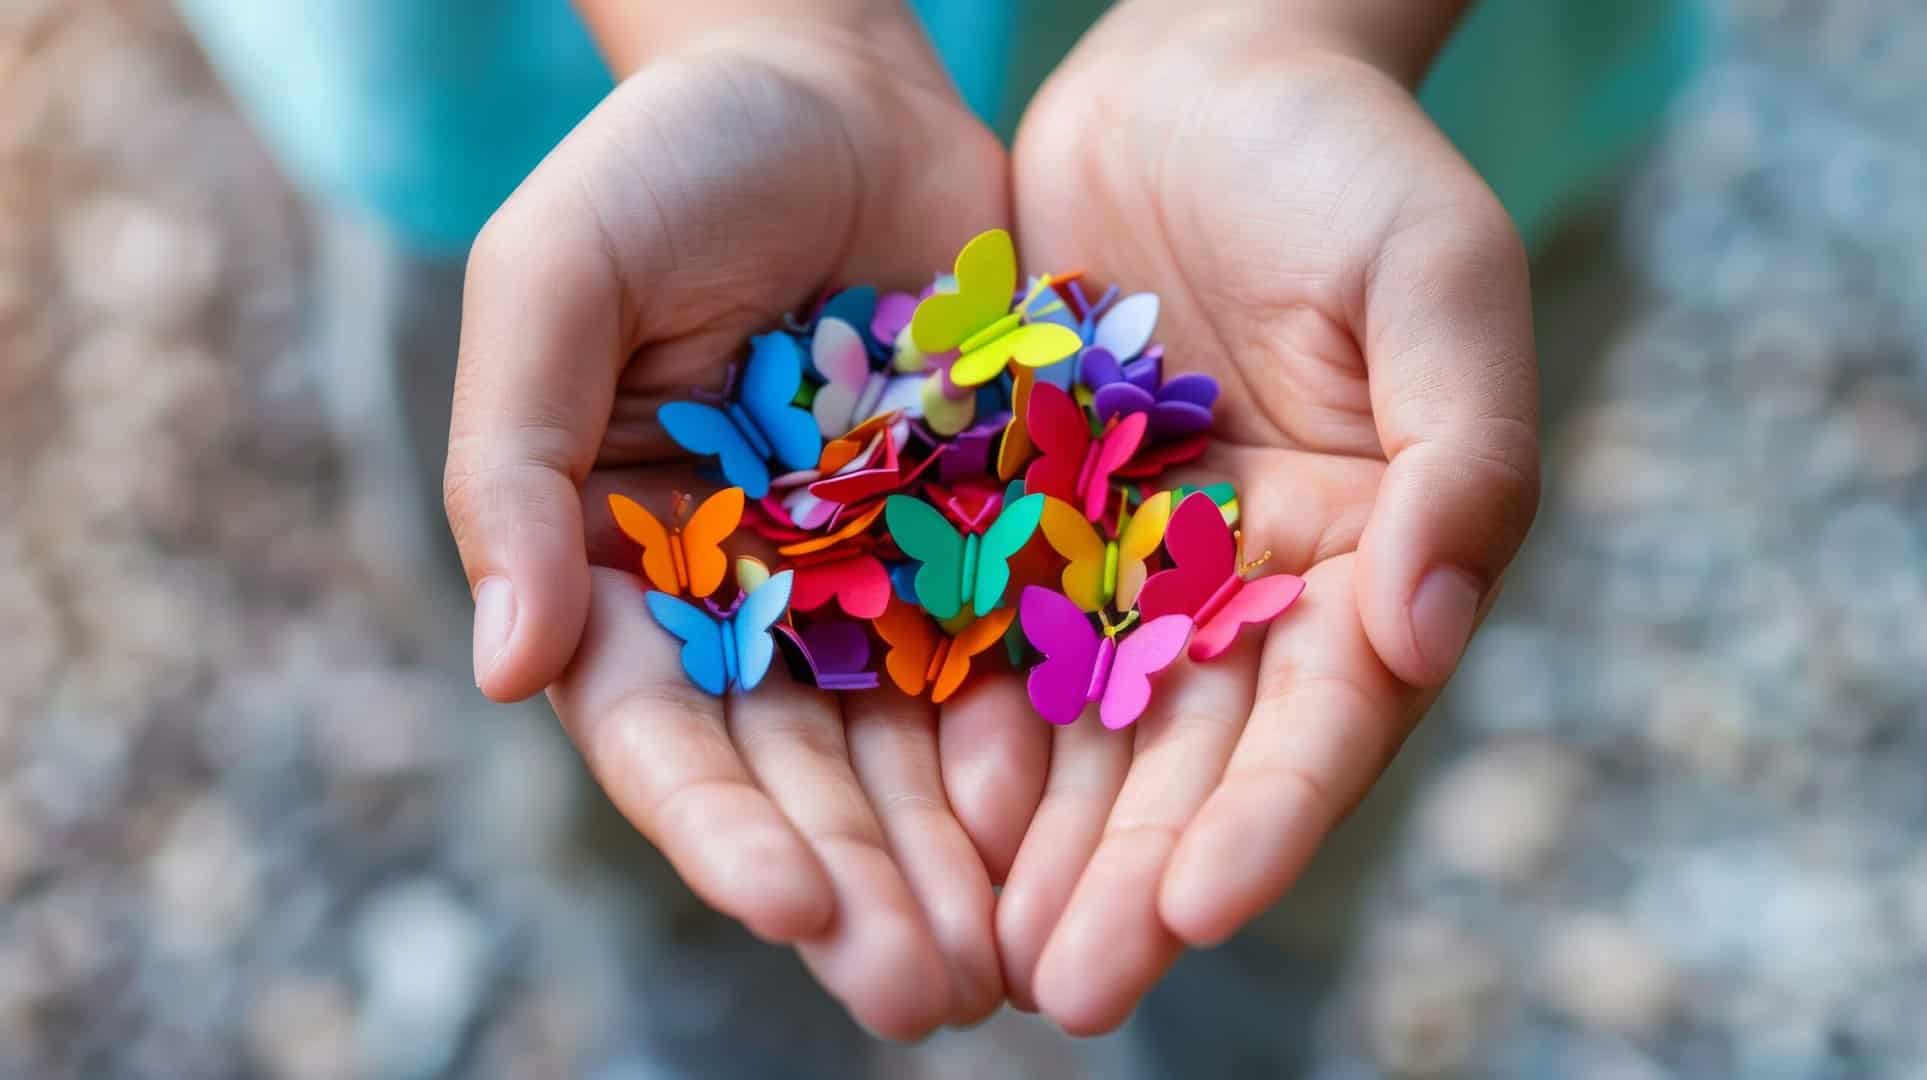 A close up of hands holding colorful, plastic butterflies.